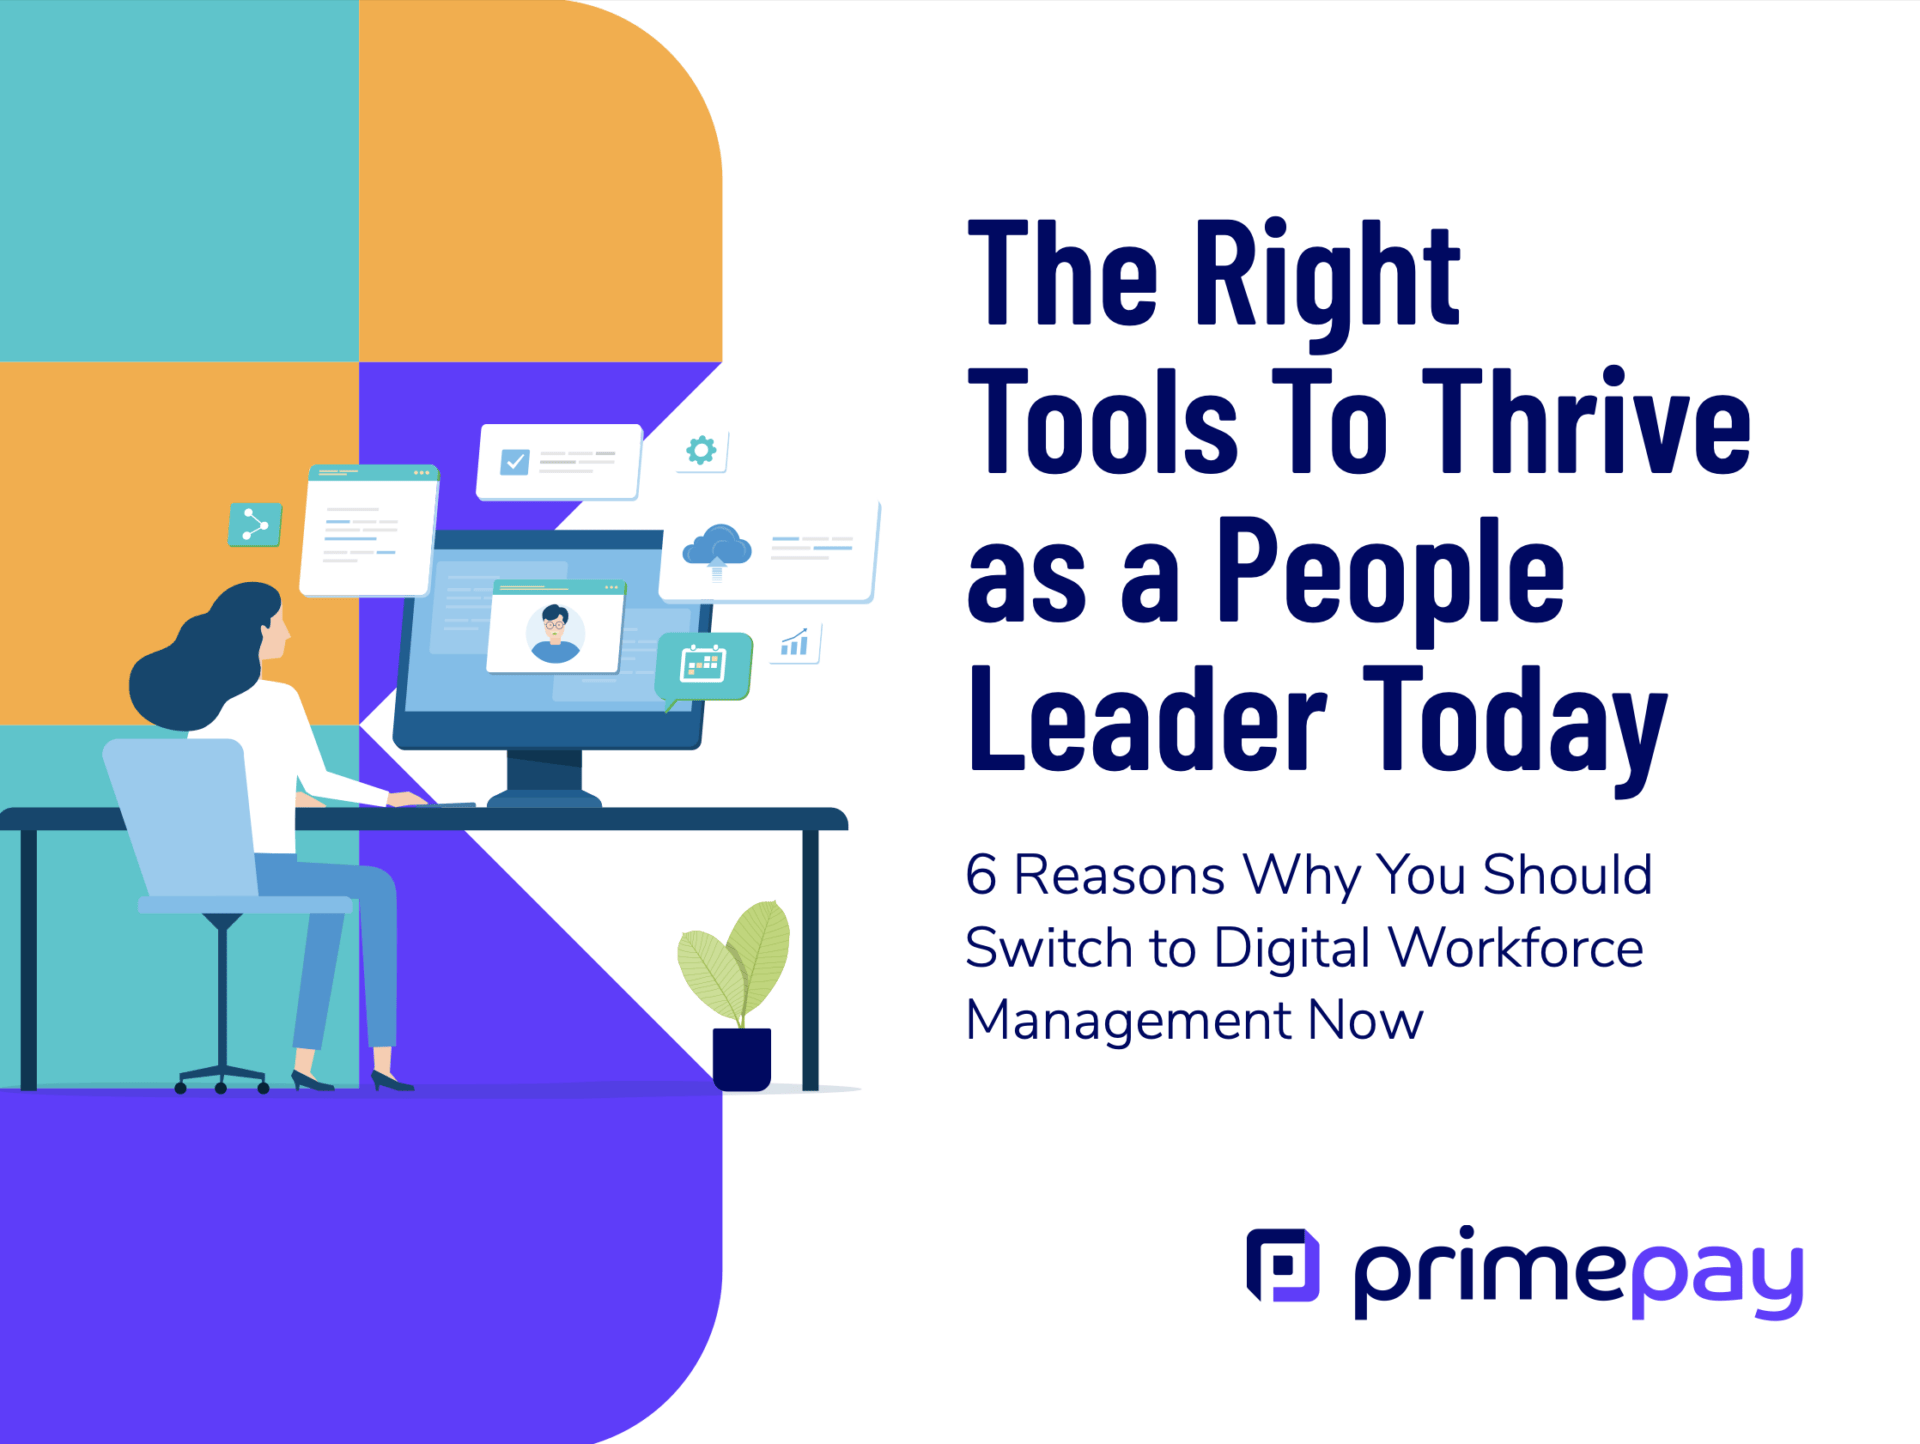 Right Tools to Thrive as a People Leader white paper cover image.